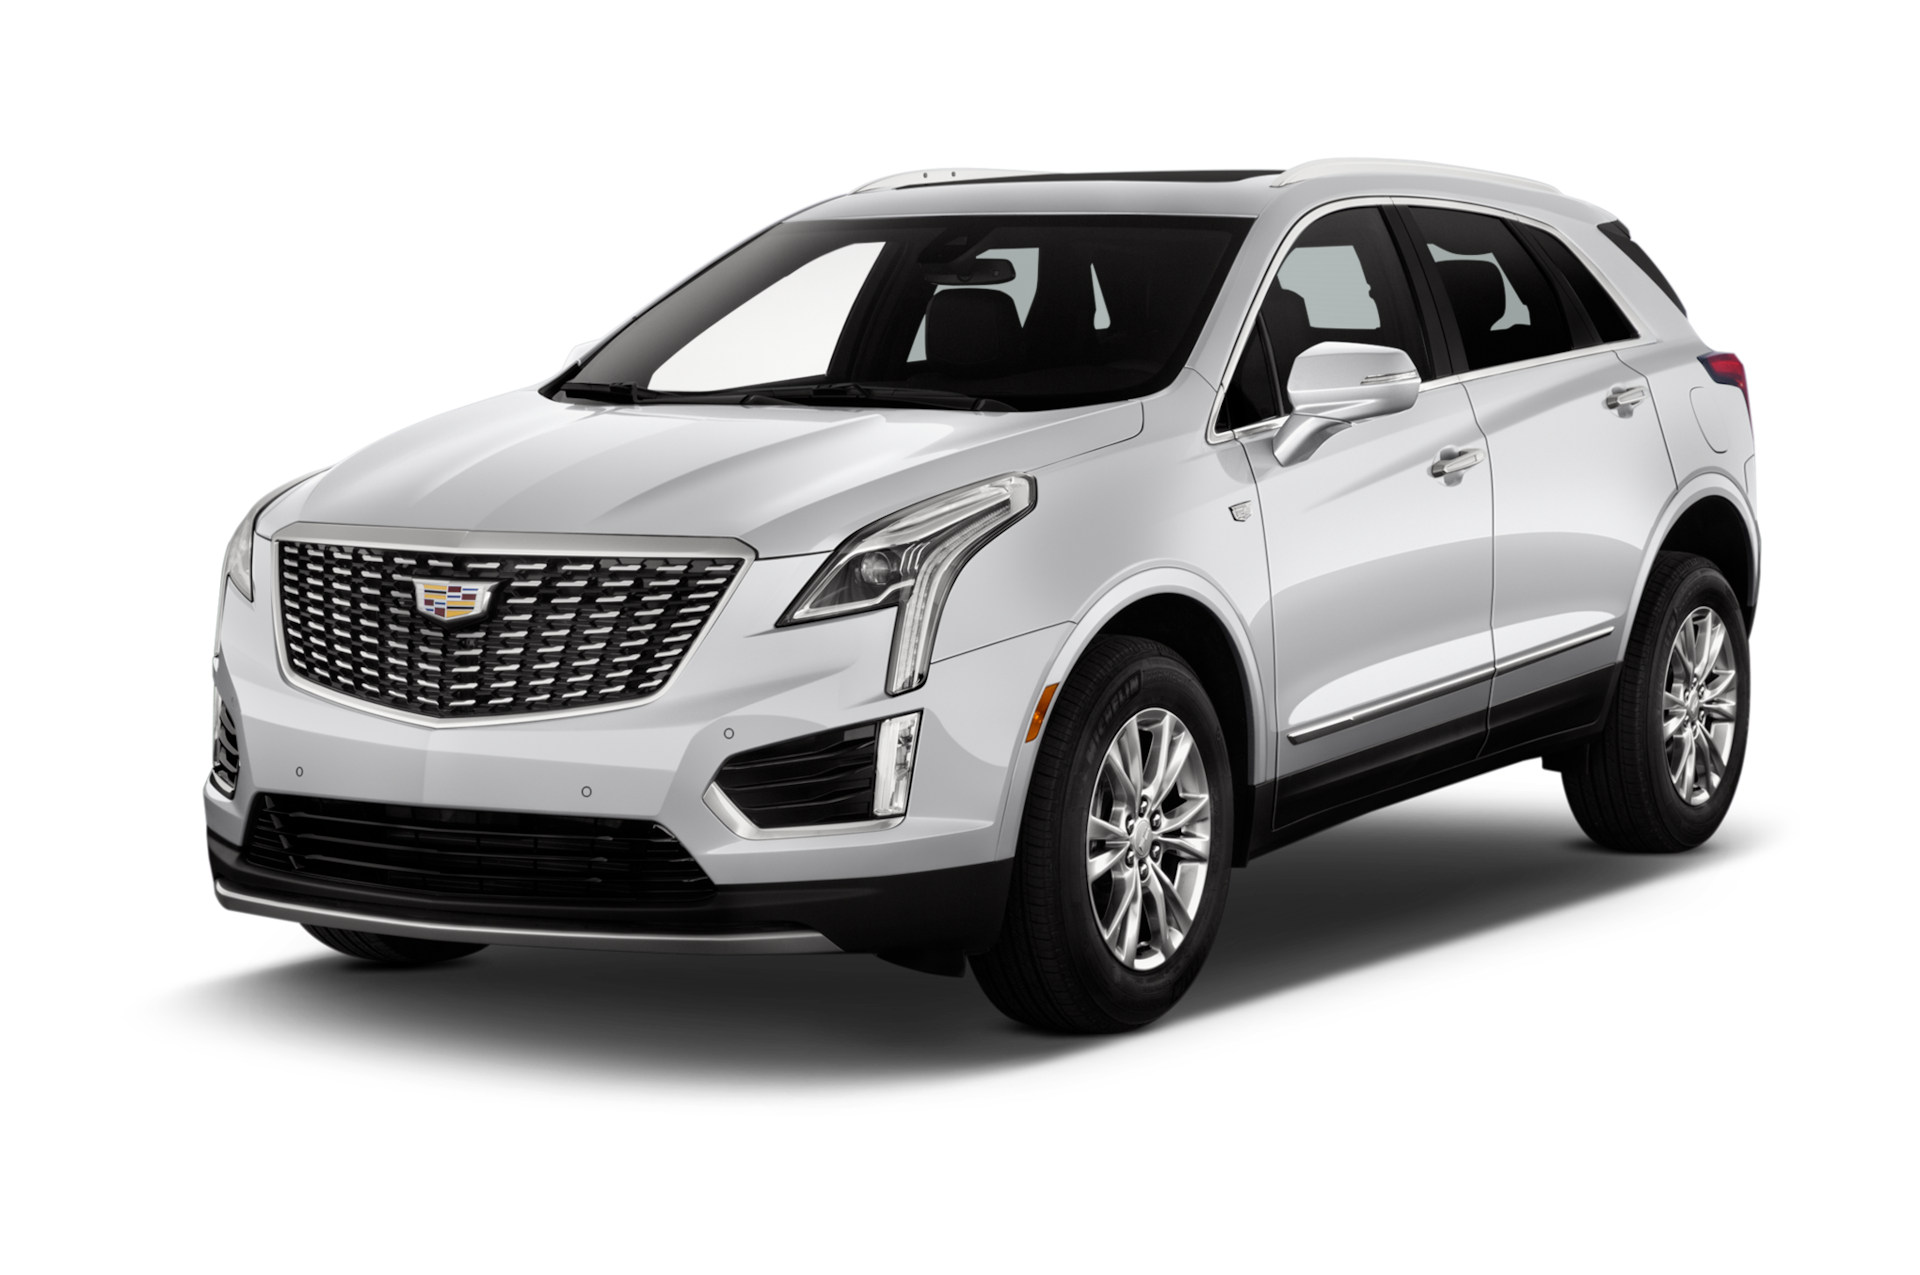 2020 Cadillac XT5 Prices, Reviews, and Photos - MotorTrend